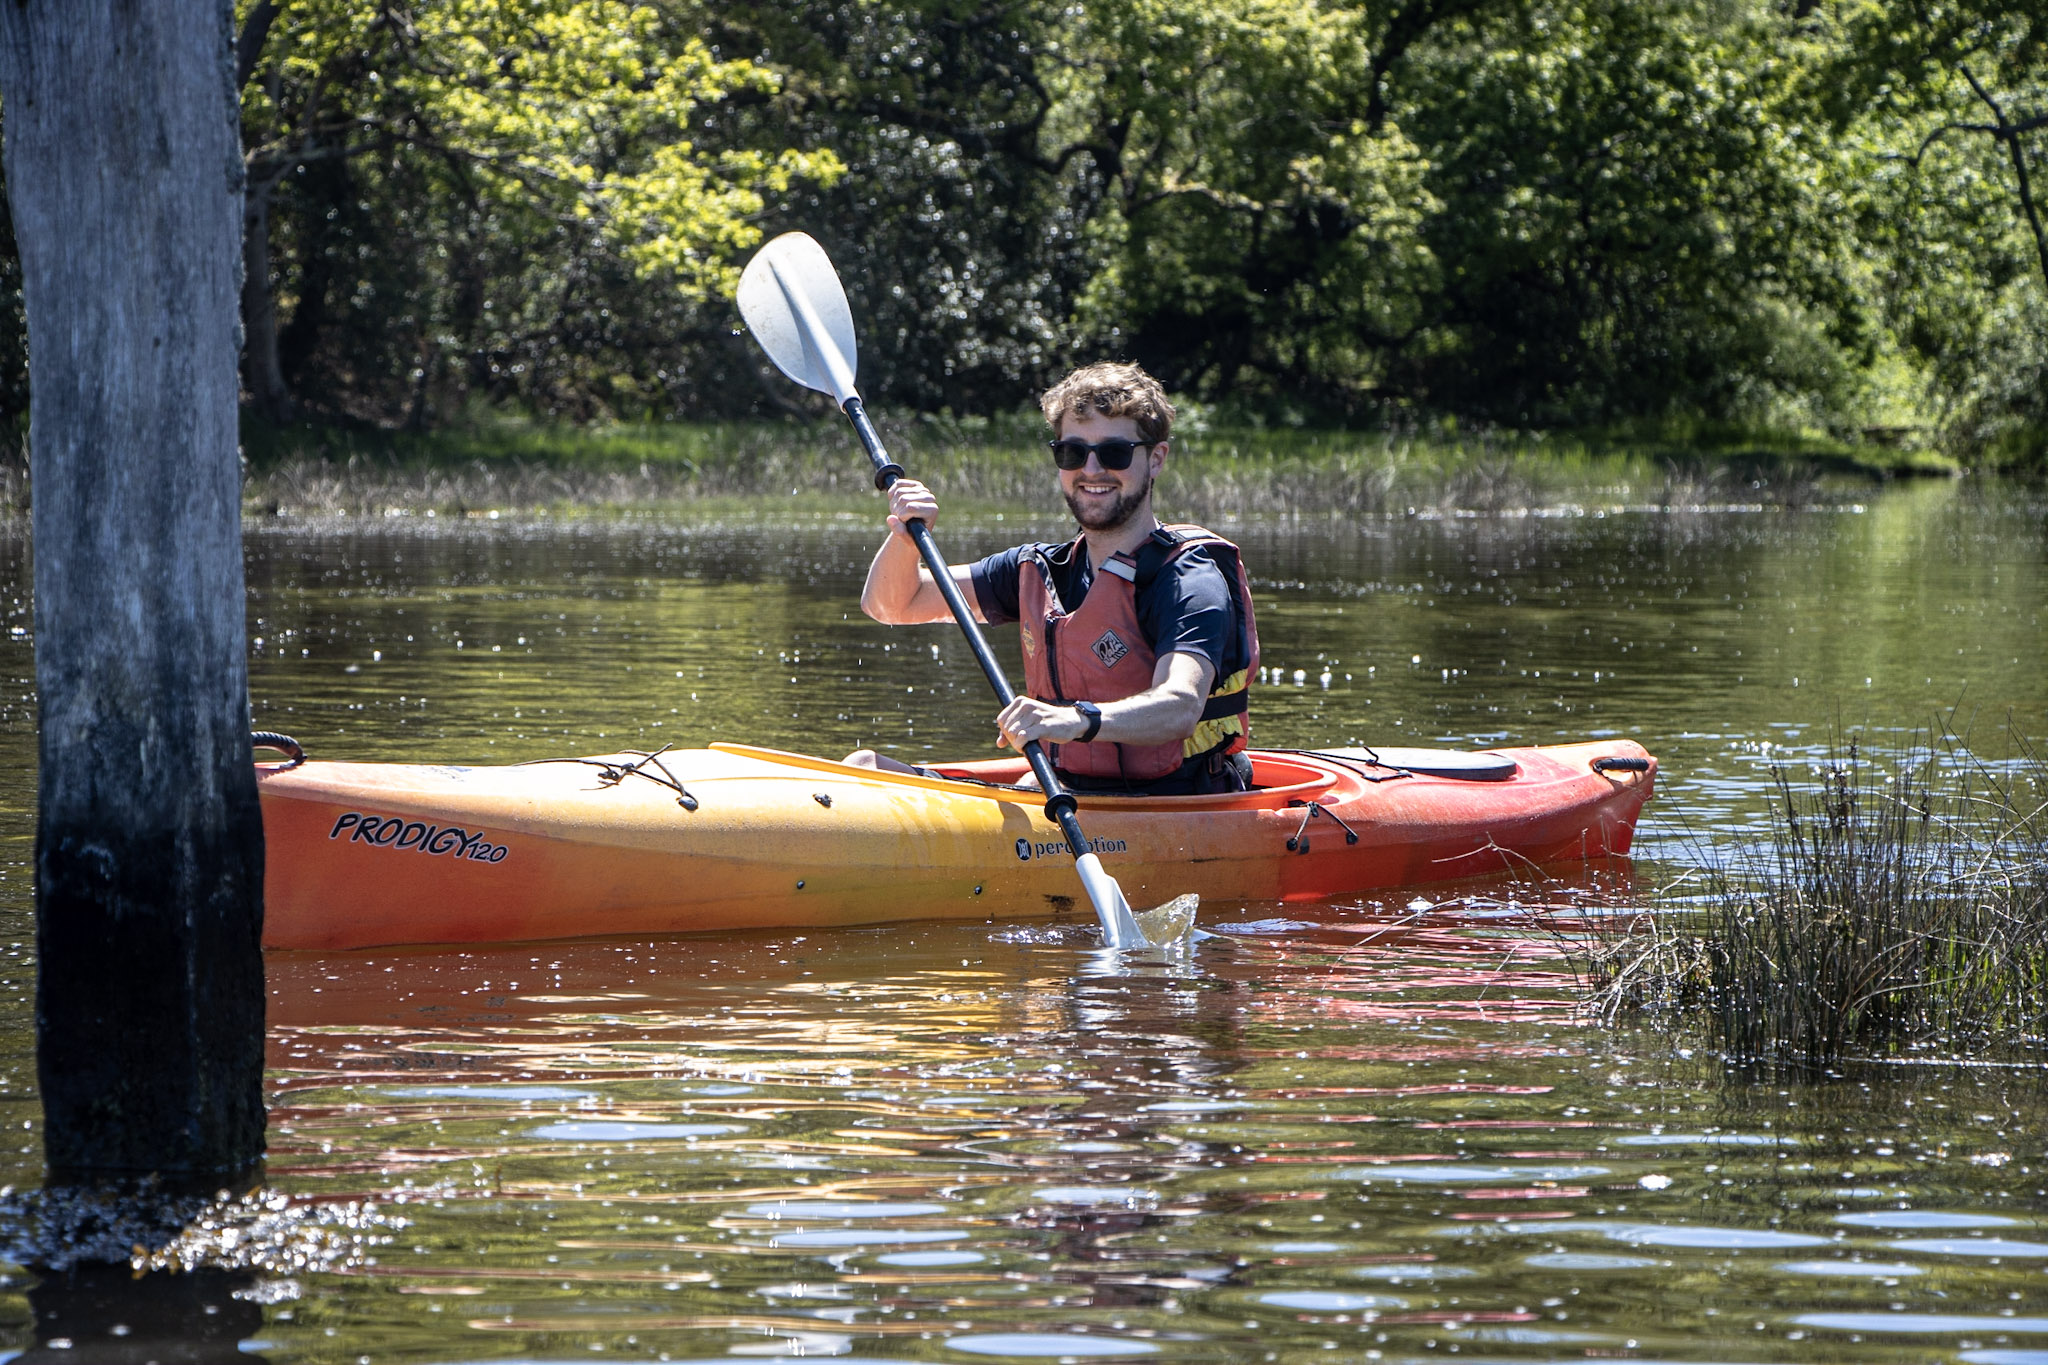 Activity gift vouchers can include a kayaking tour on the Beaulieu River